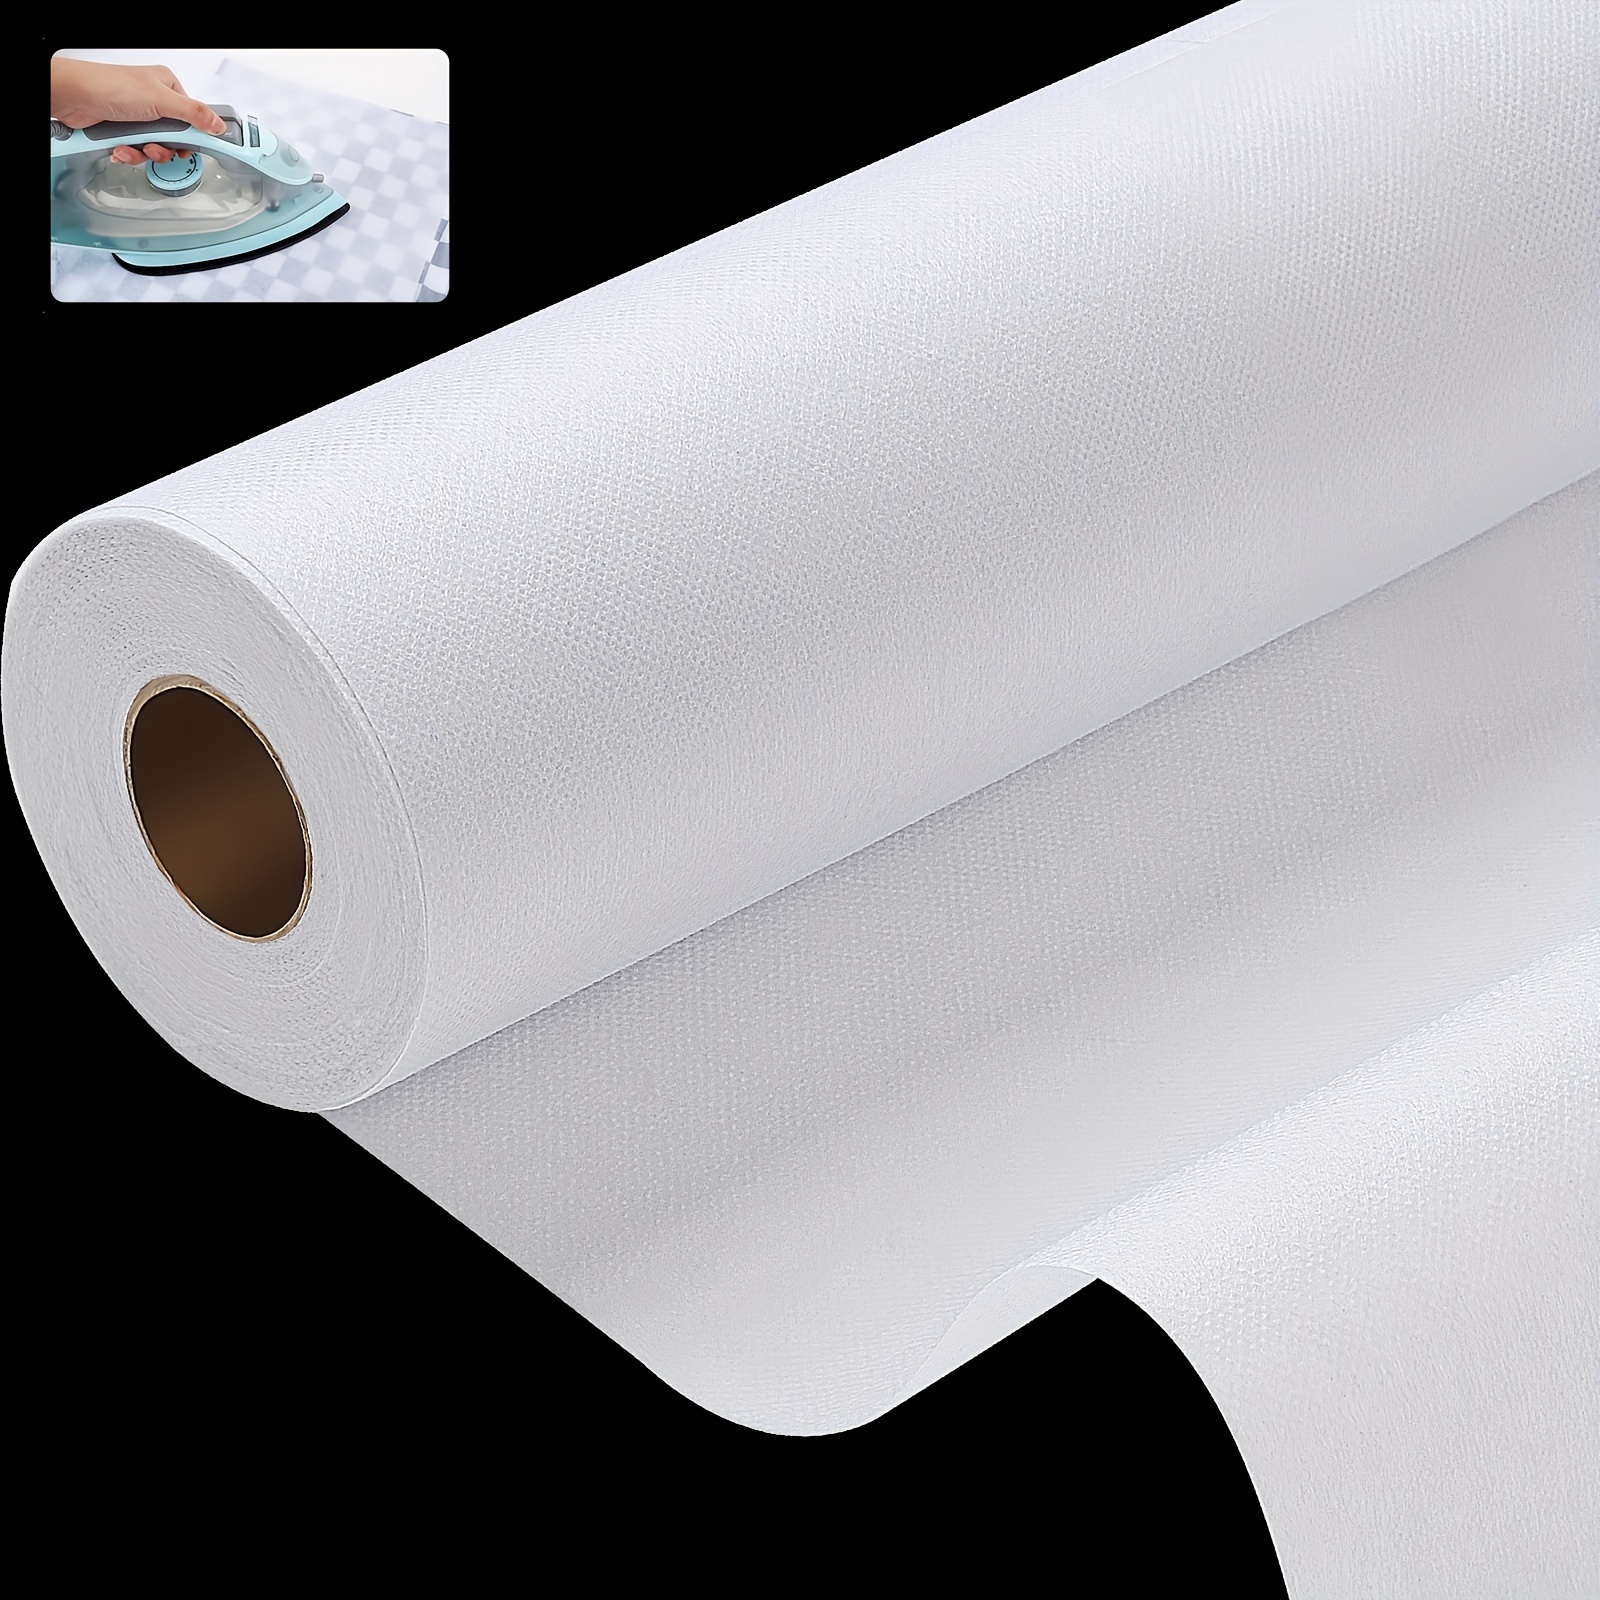 LIGHTWEIGHT FUSIBLE INTERFACING WOVEN 55 INCHES WIDE 1 YARD LONG